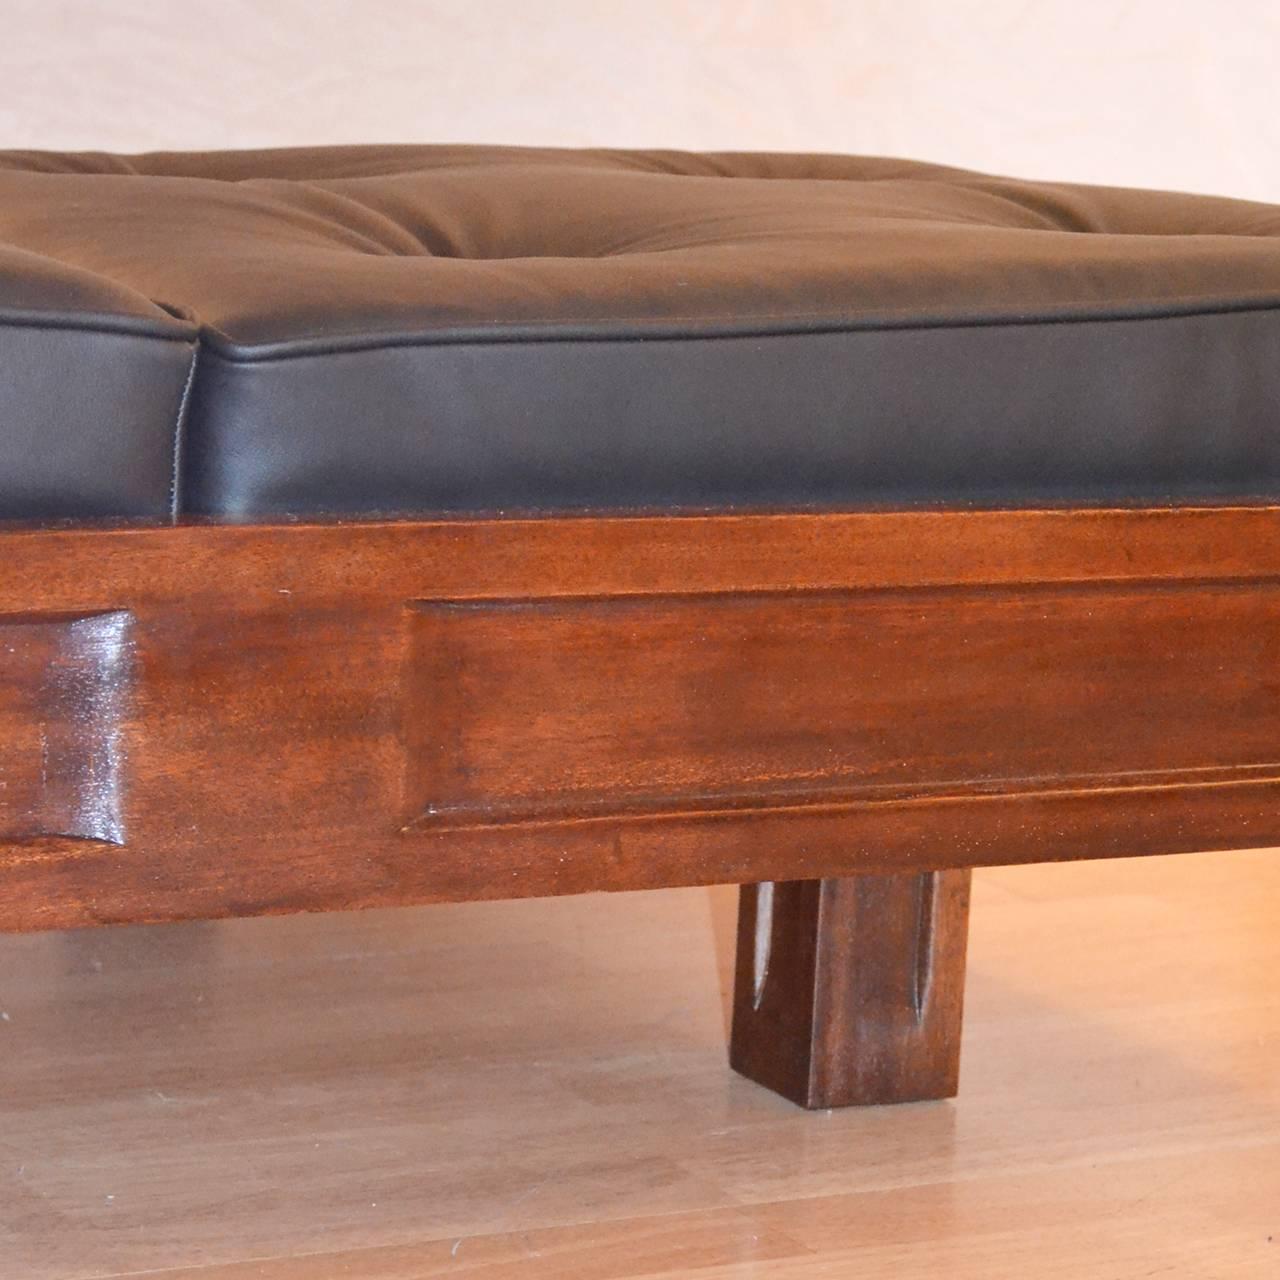 Rosewood coffee table with two seats, Italy, 1960s.
Cushions are reupholstered in real black leather.
Fantastic design. Great condition.